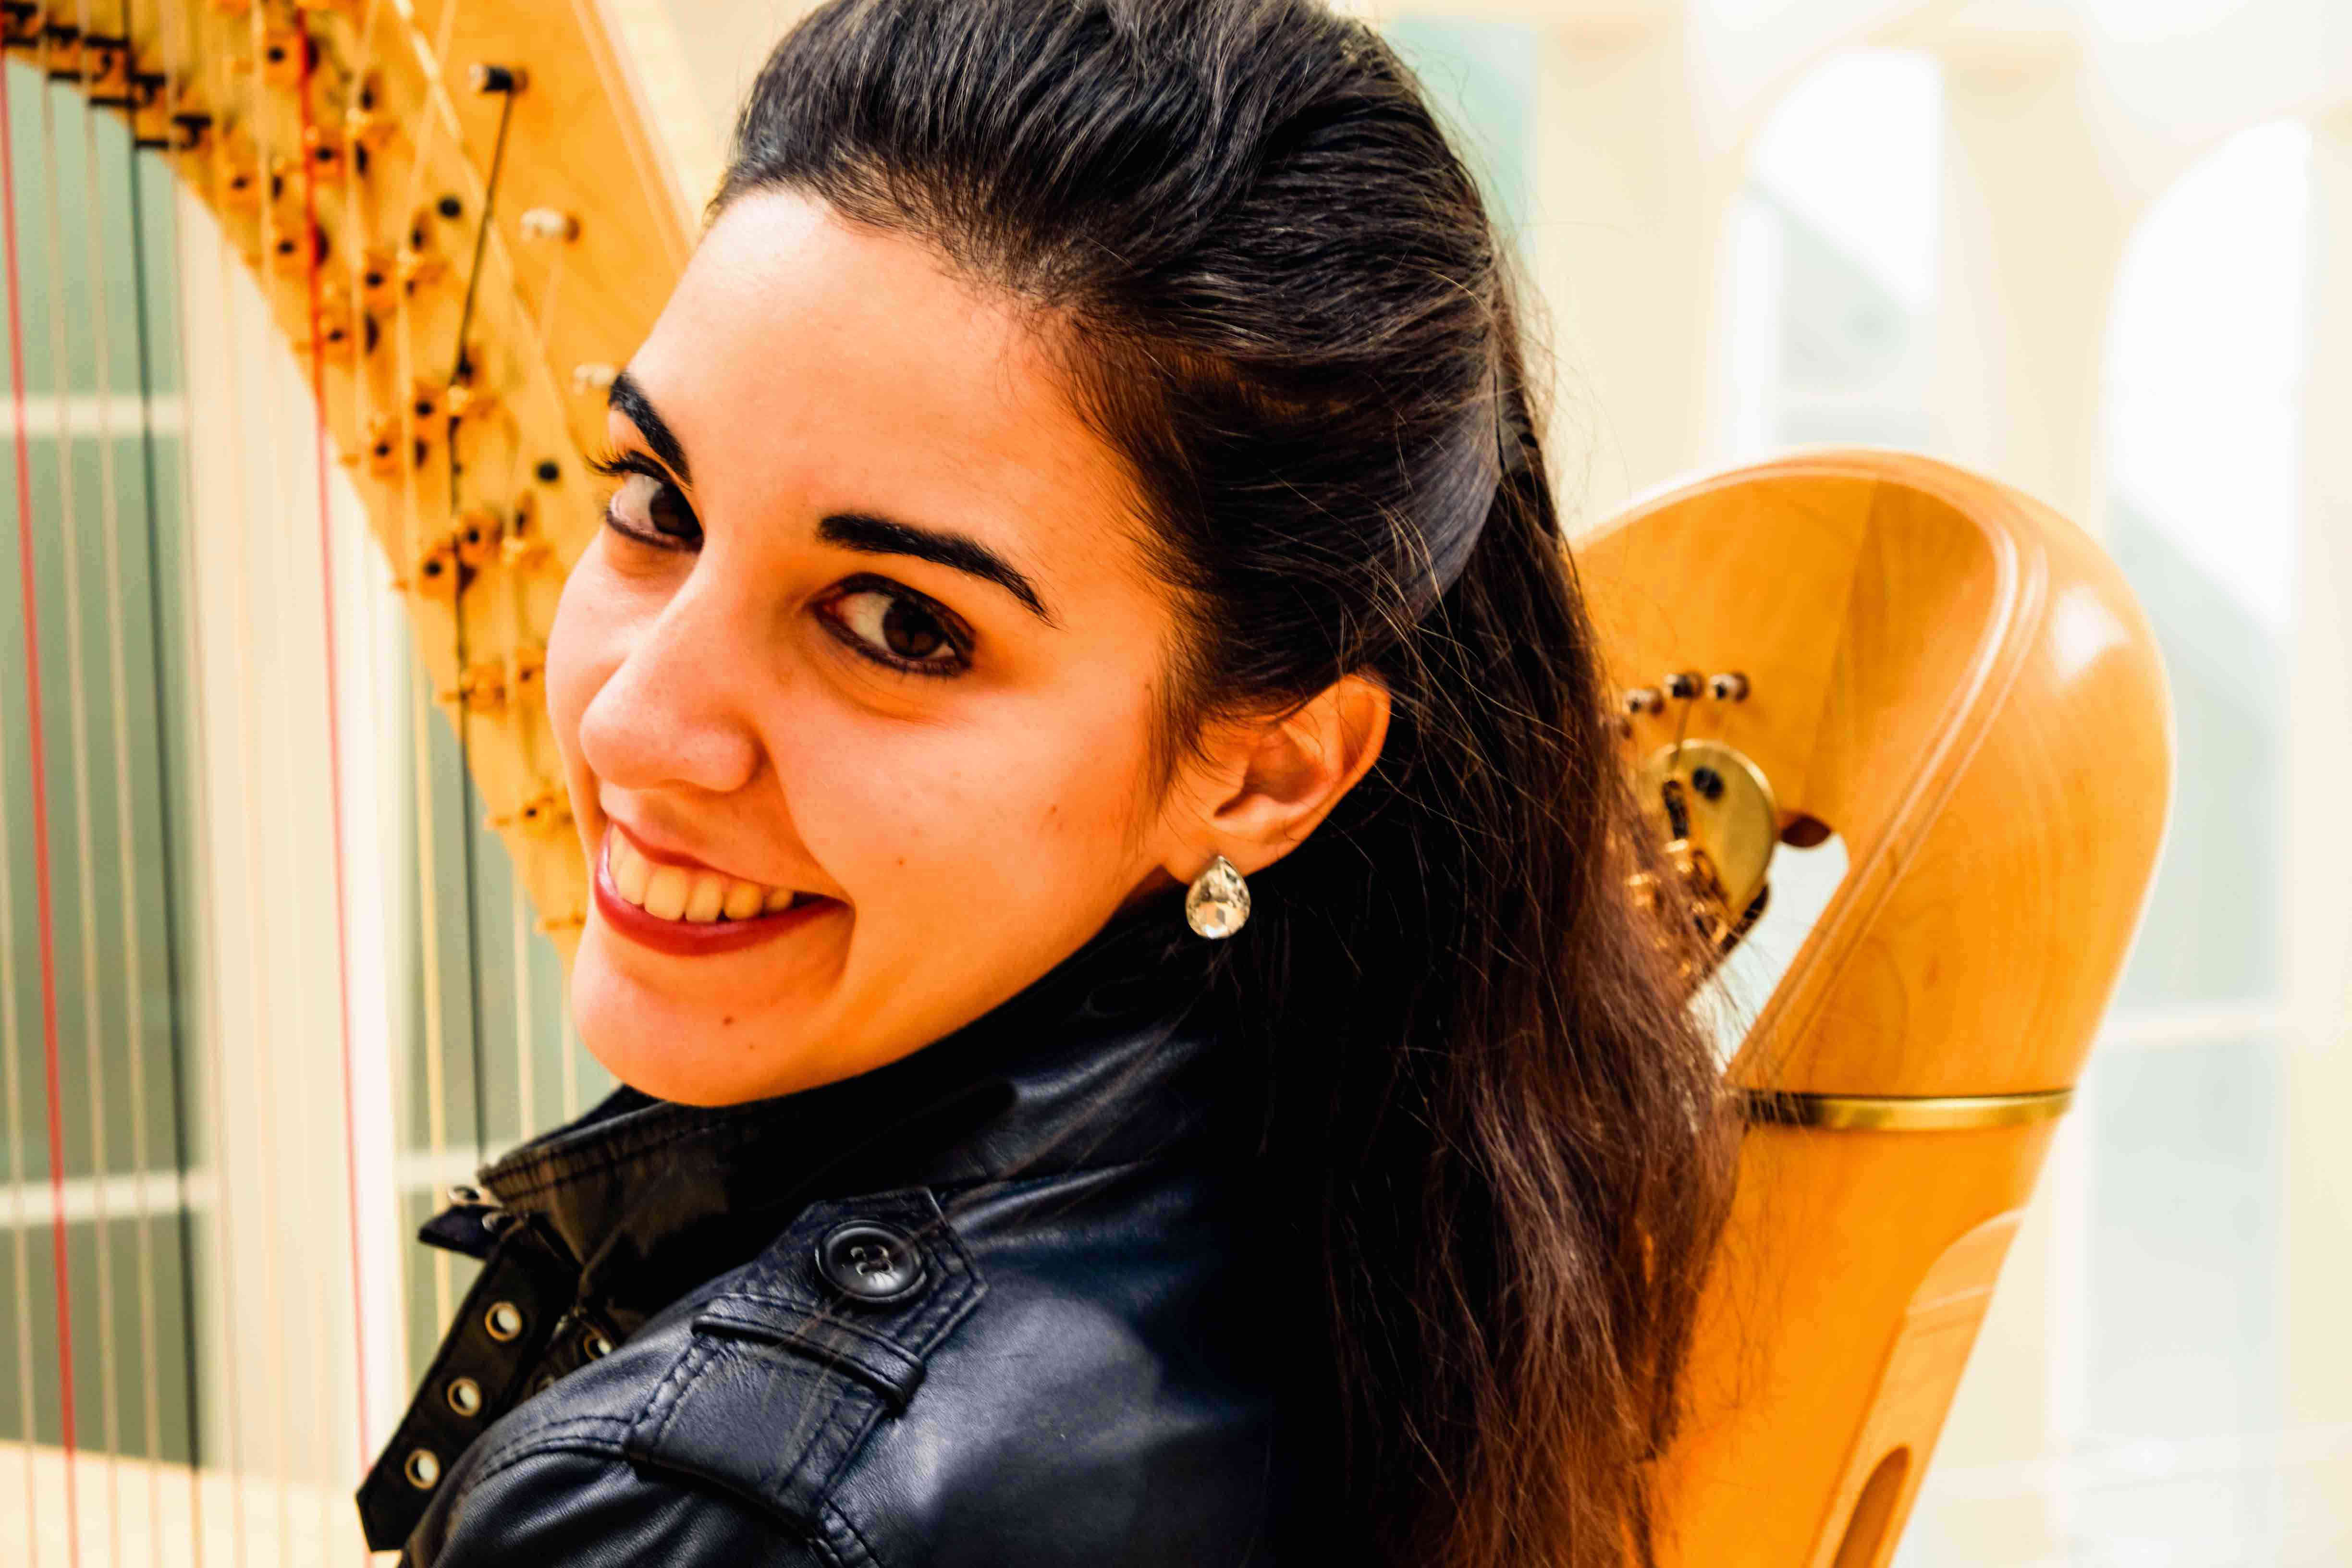 Harpist Cristina Montes makes her debut with the OSPA - ACM Concerts